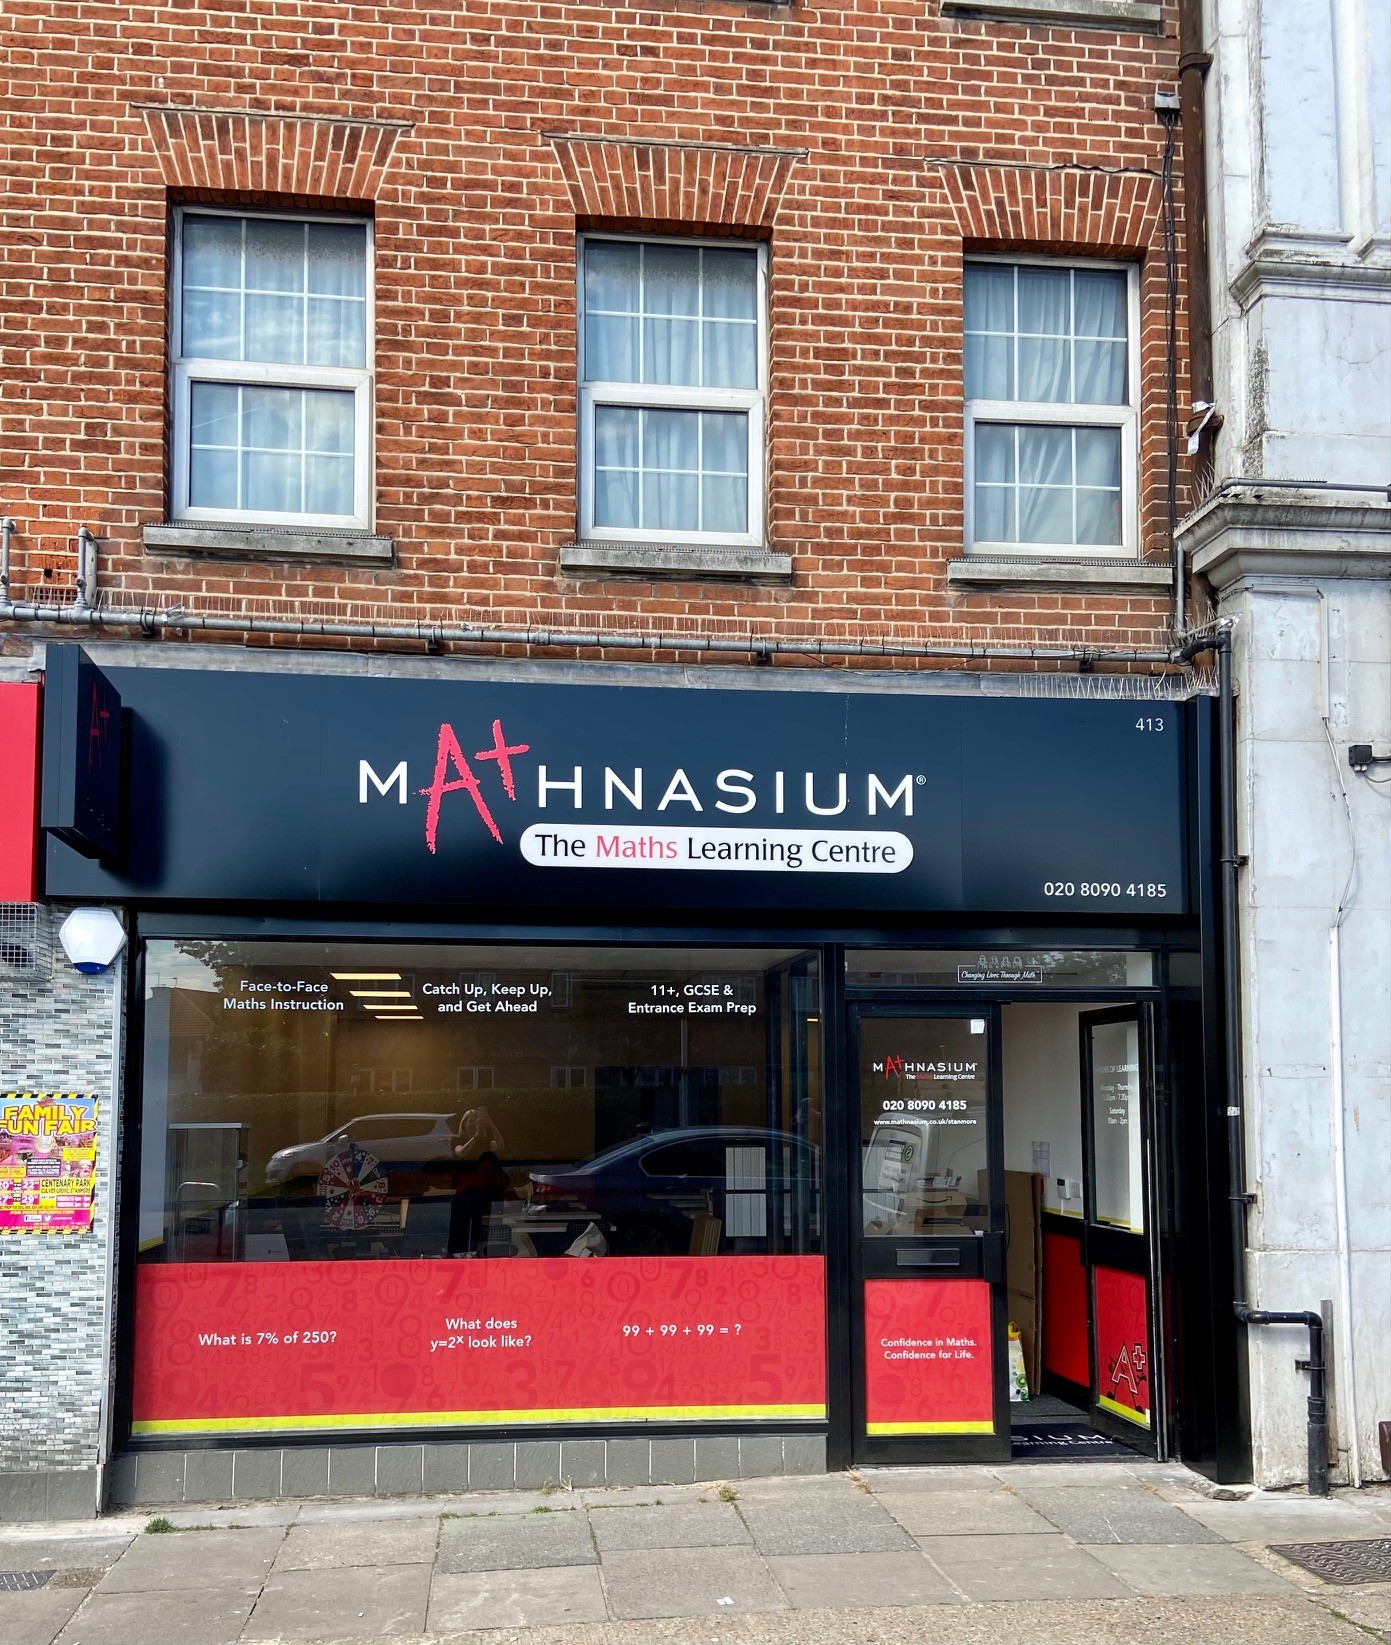 Mathnasium’s London Roll-Out Continues With The Opening of New Learning Centre in Stanmore